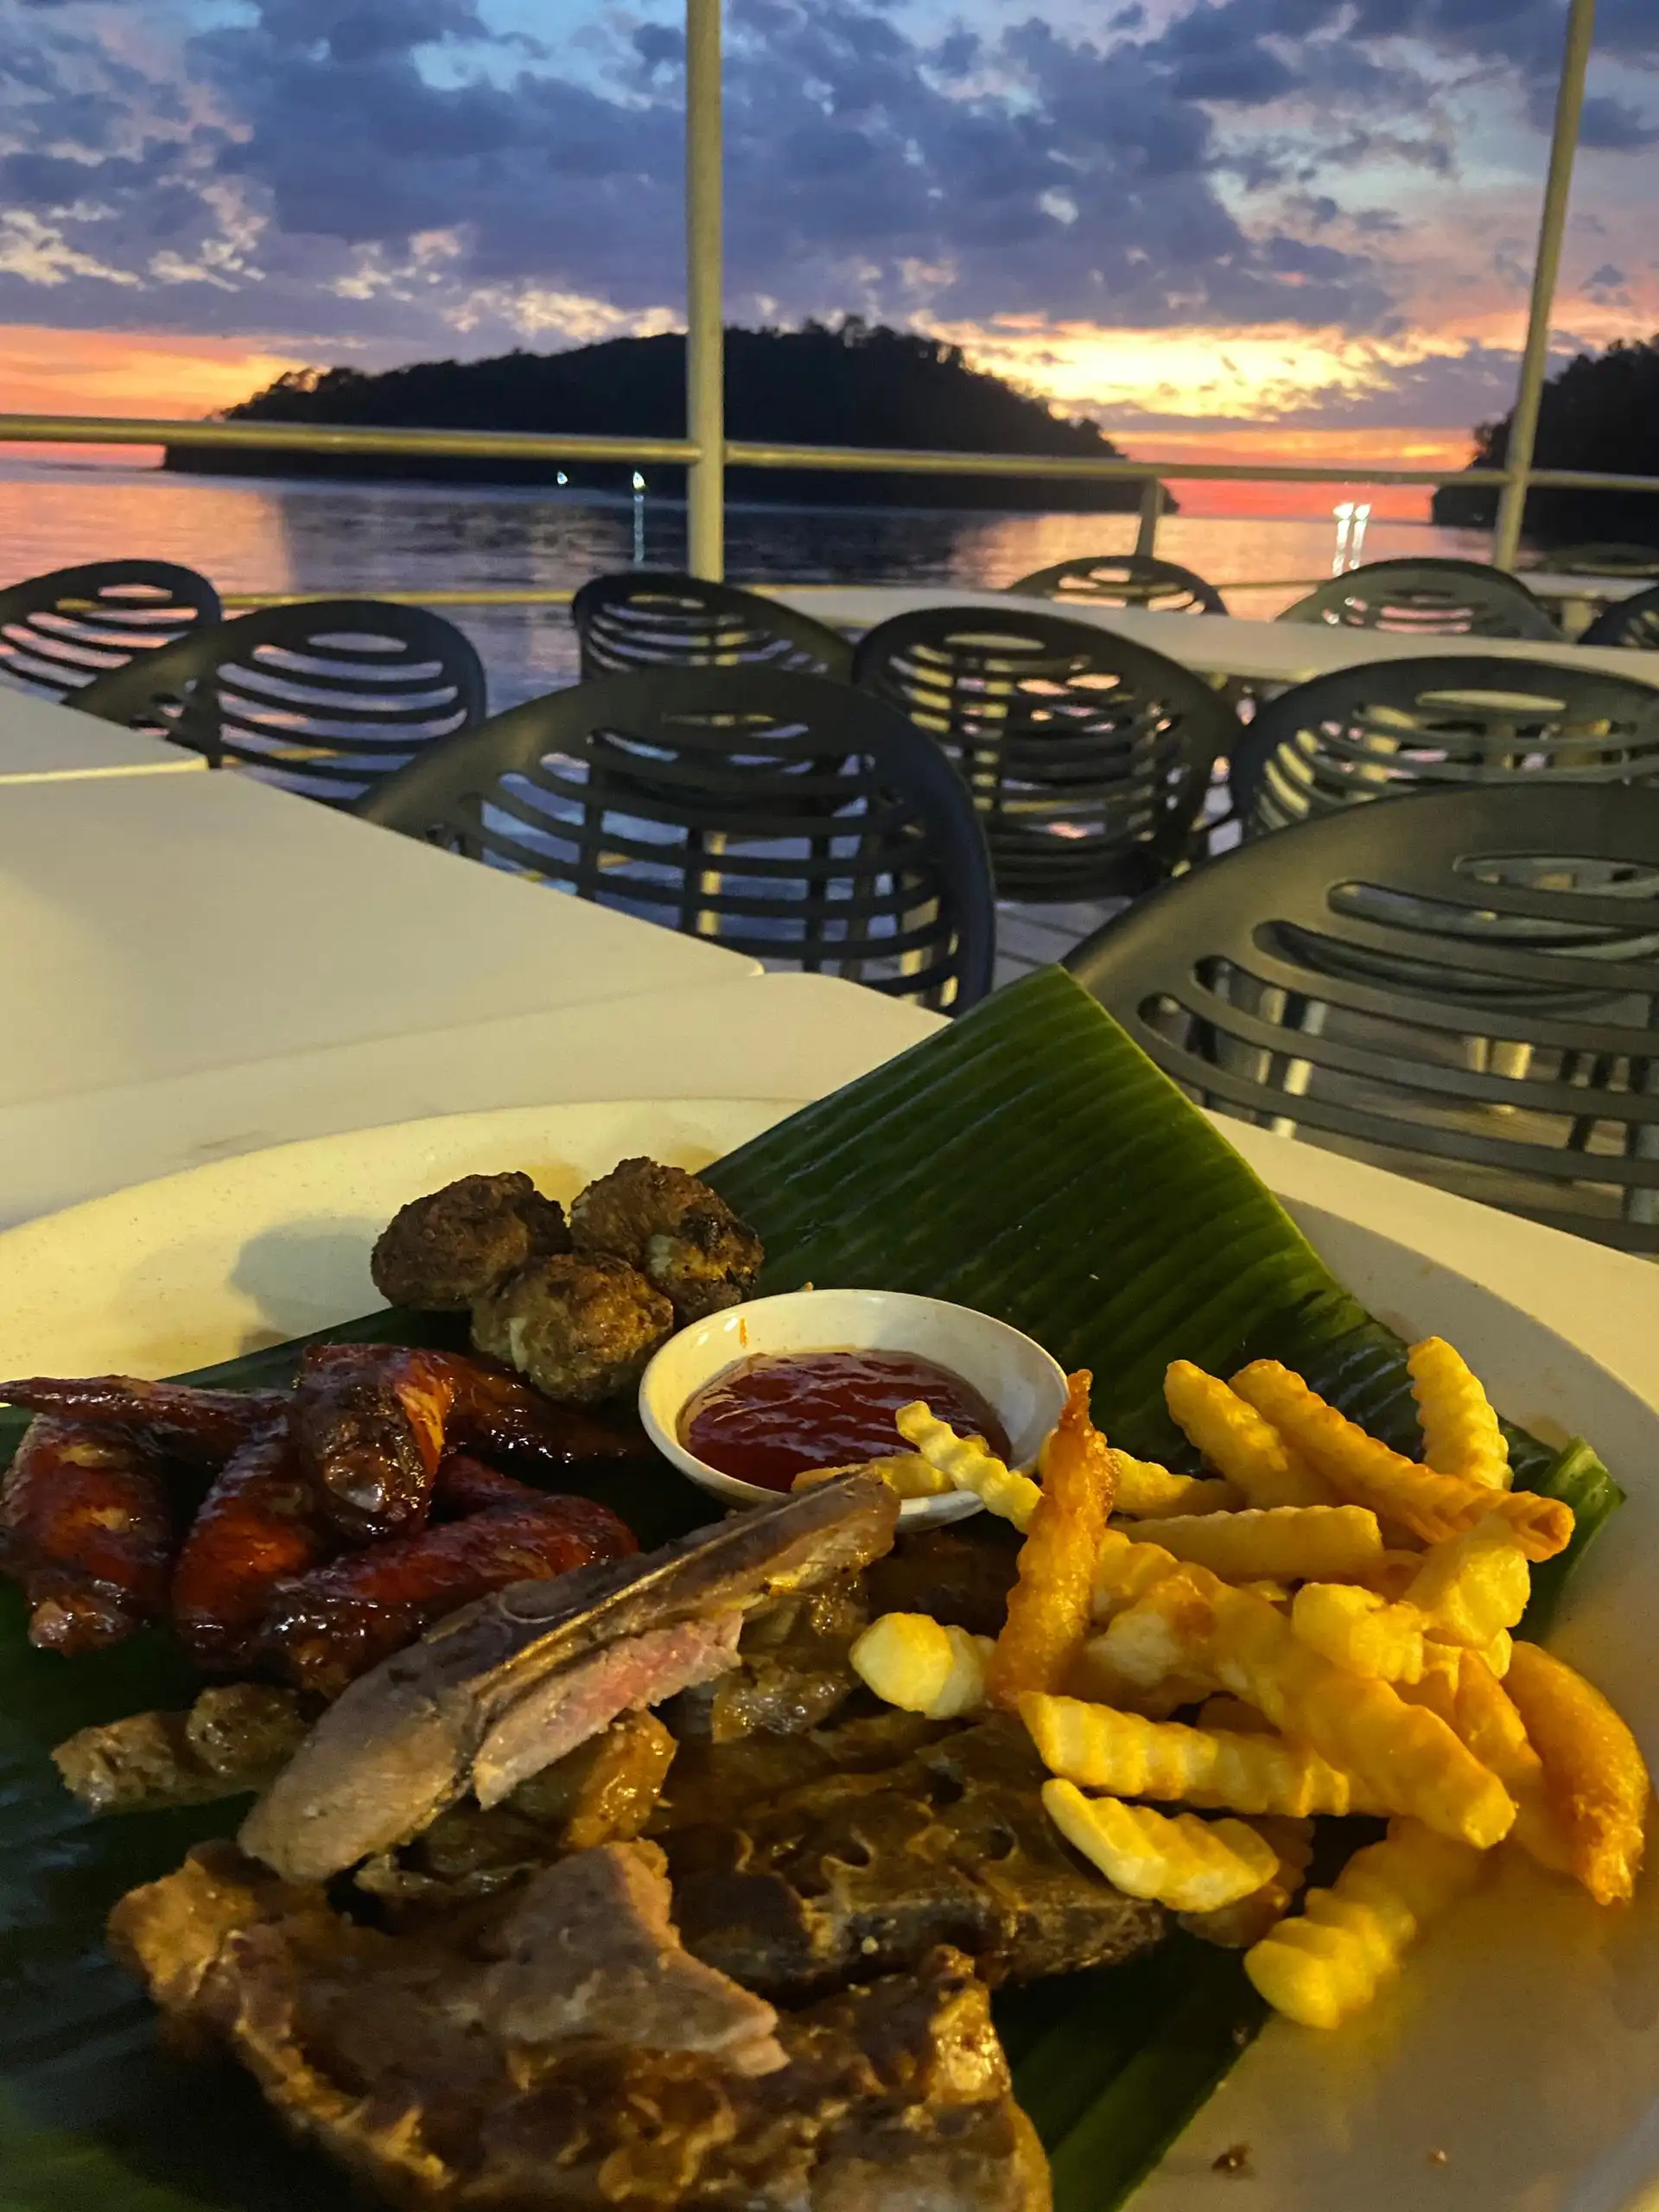 Sunset view over water from a restaurant with a plate of mixed grilled meats and fries on the table.